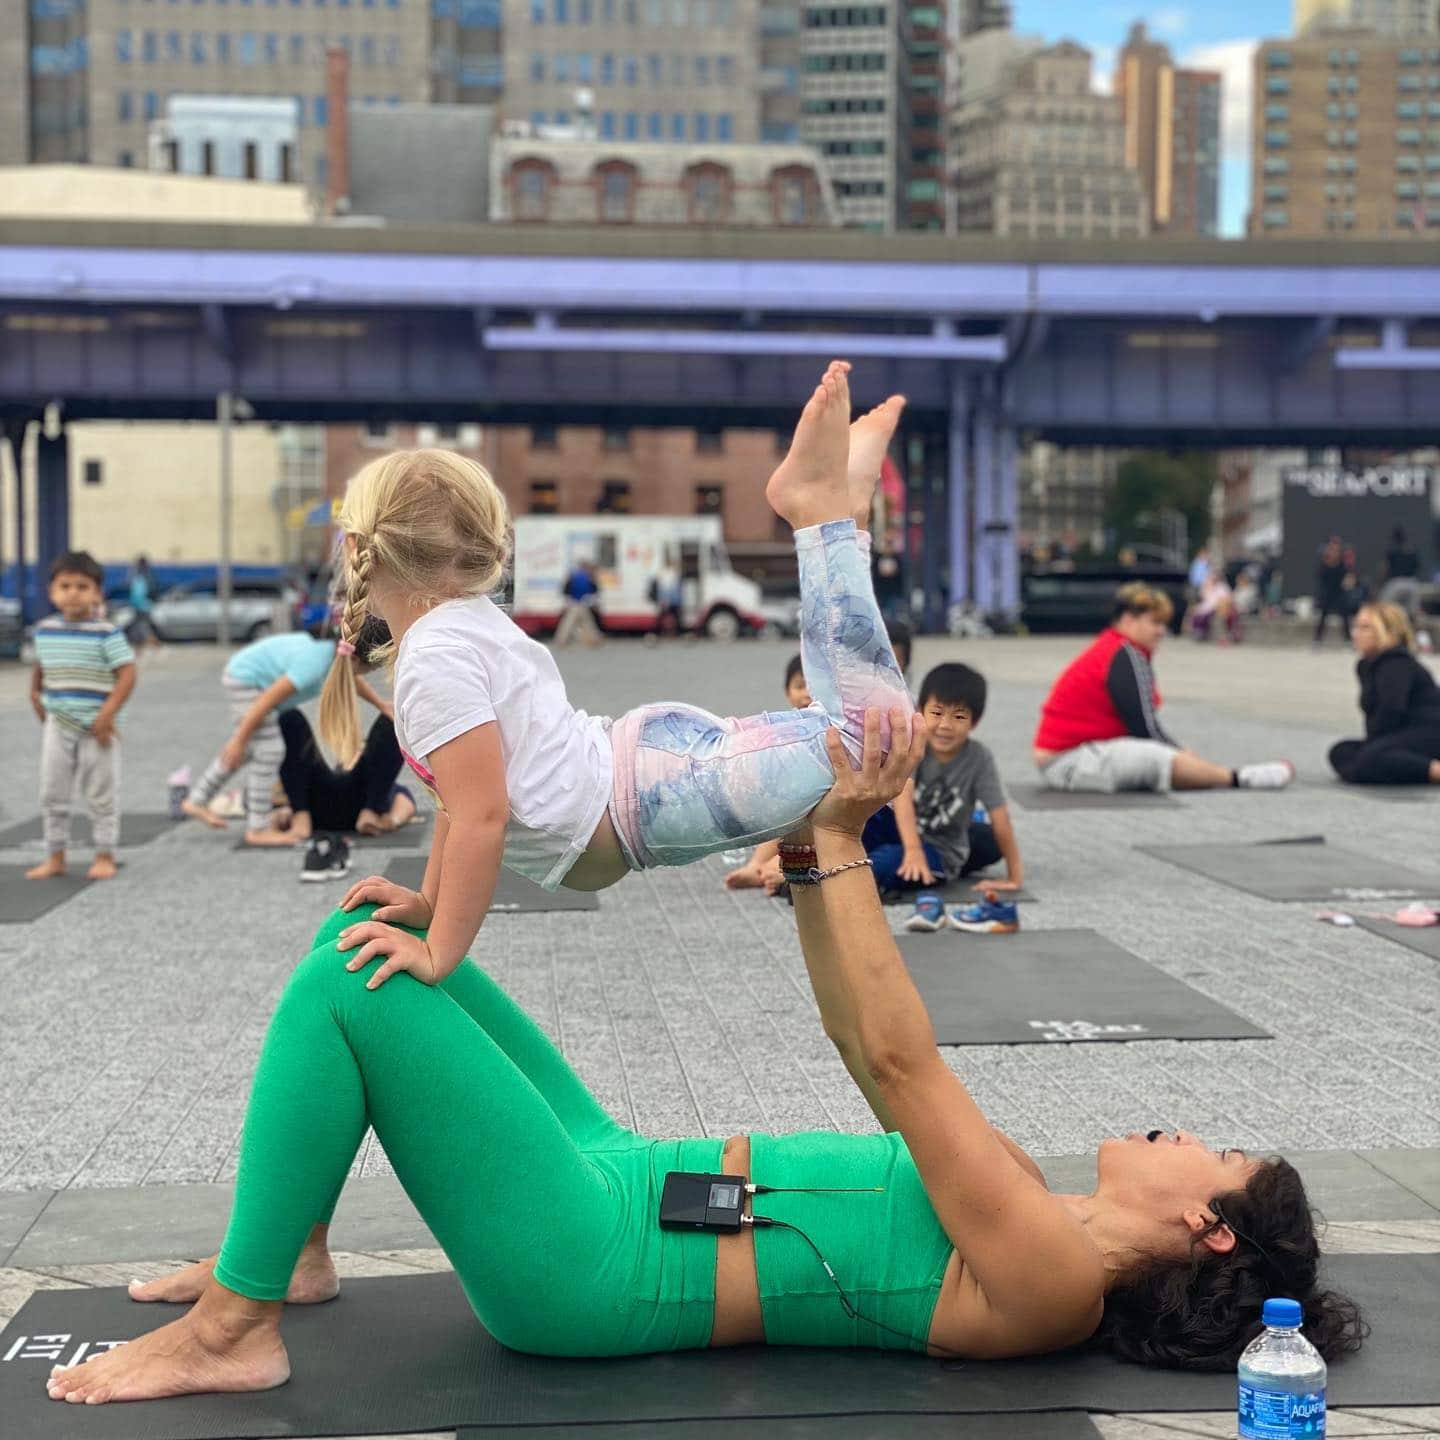 Bring the fam. Bend and stretch. Join us for the last @karmakidsyoga class of the season. Wednesday 10/13. RSVP ➤ Link in bio. #SeaportKids